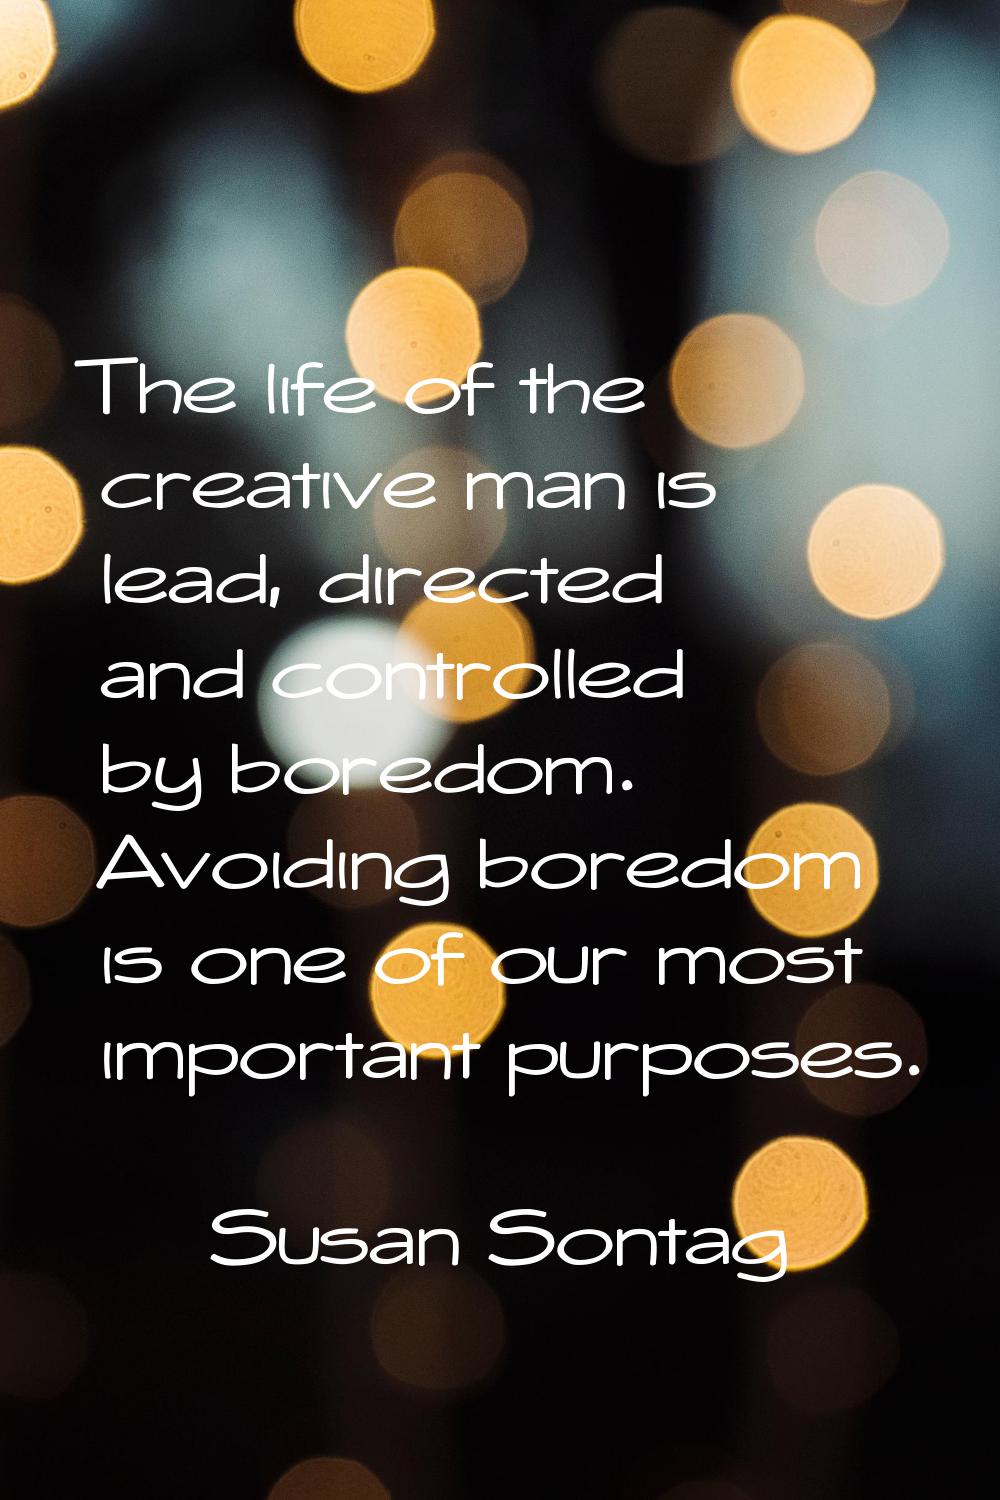 The life of the creative man is lead, directed and controlled by boredom. Avoiding boredom is one o